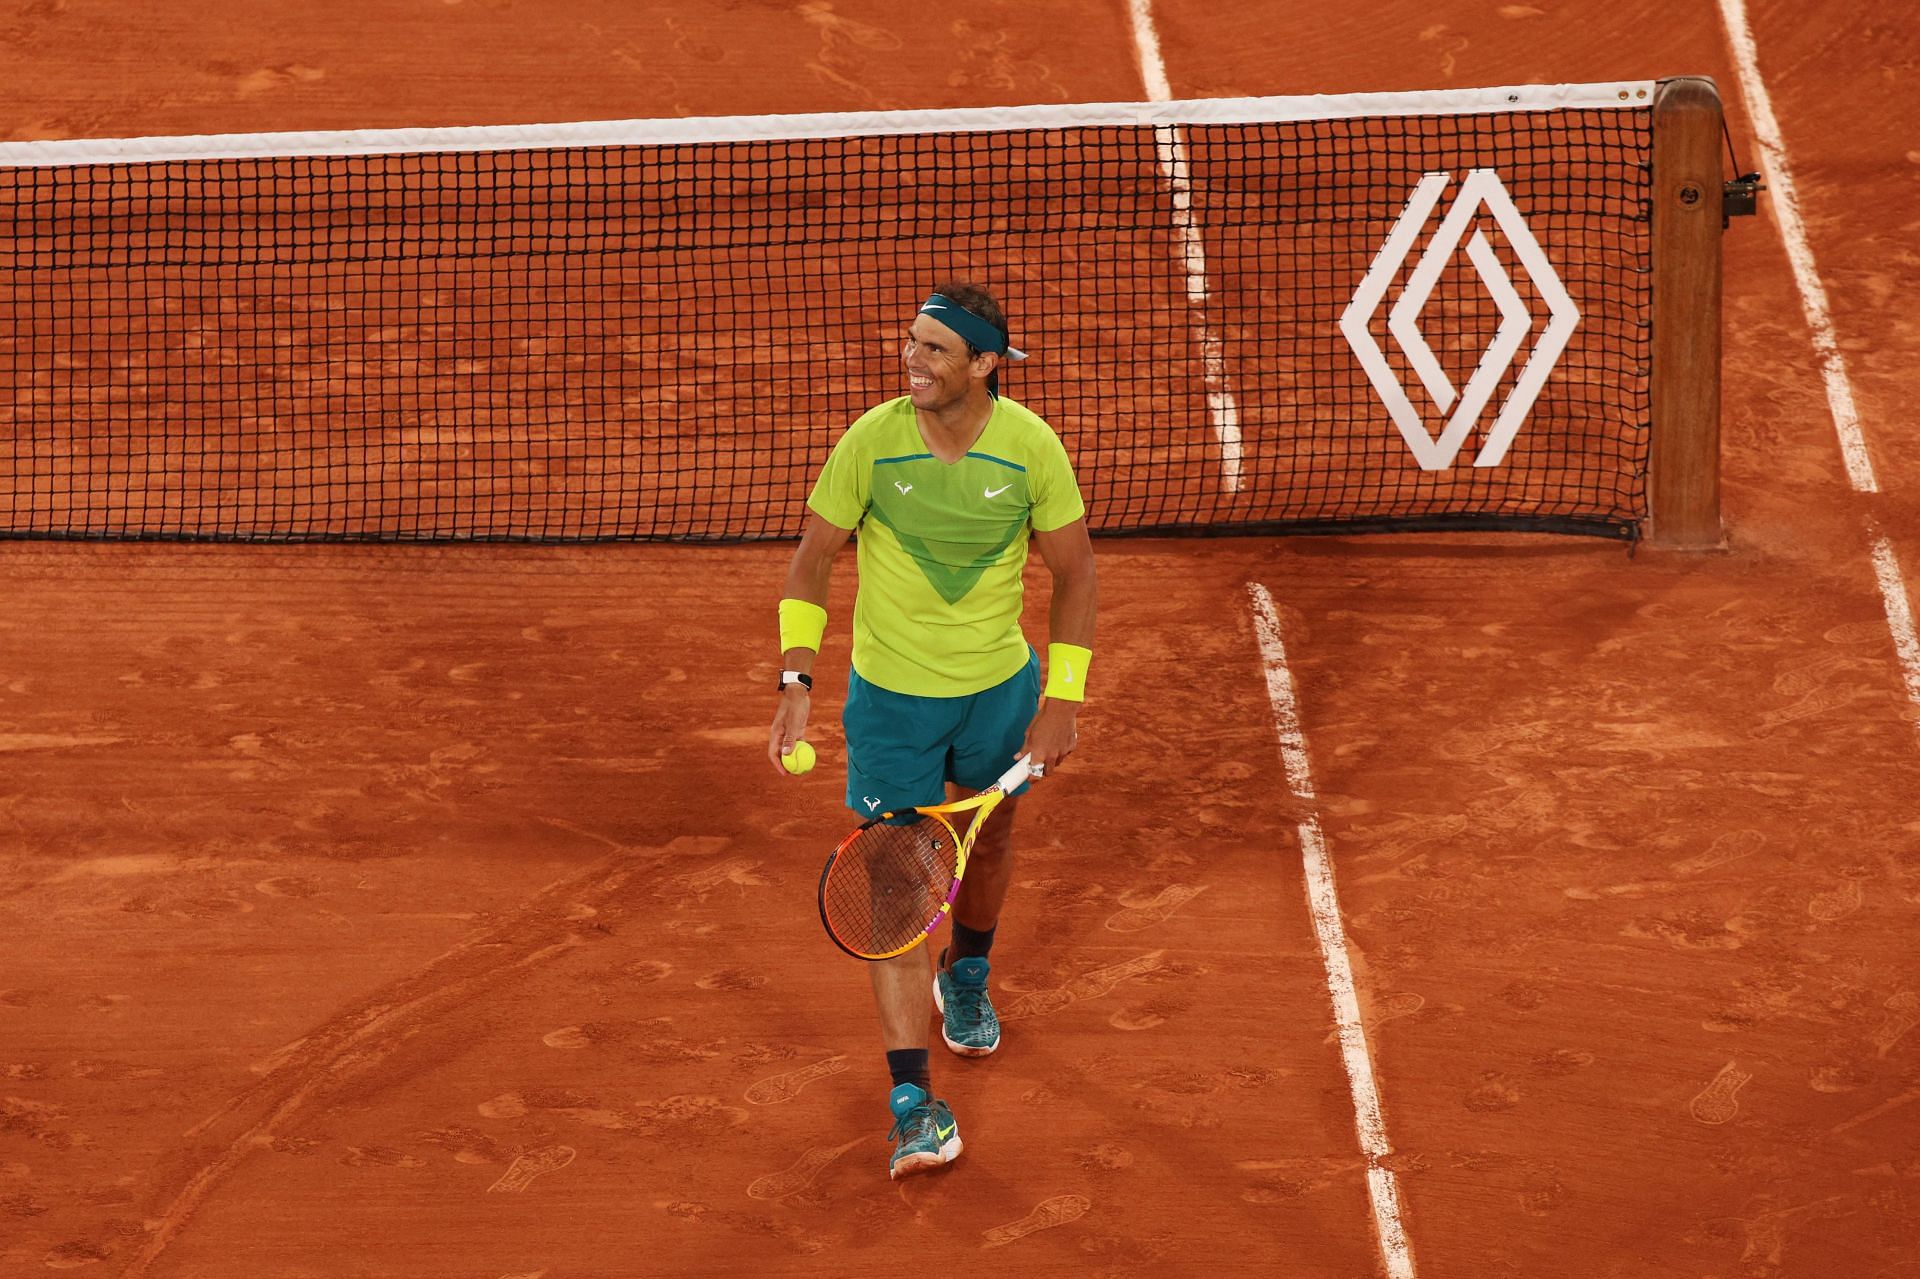 French Open 2022, Rafael Nadal vs Alexander Zverev Where to watch, TV schedule, live streaming details and more Semifinals